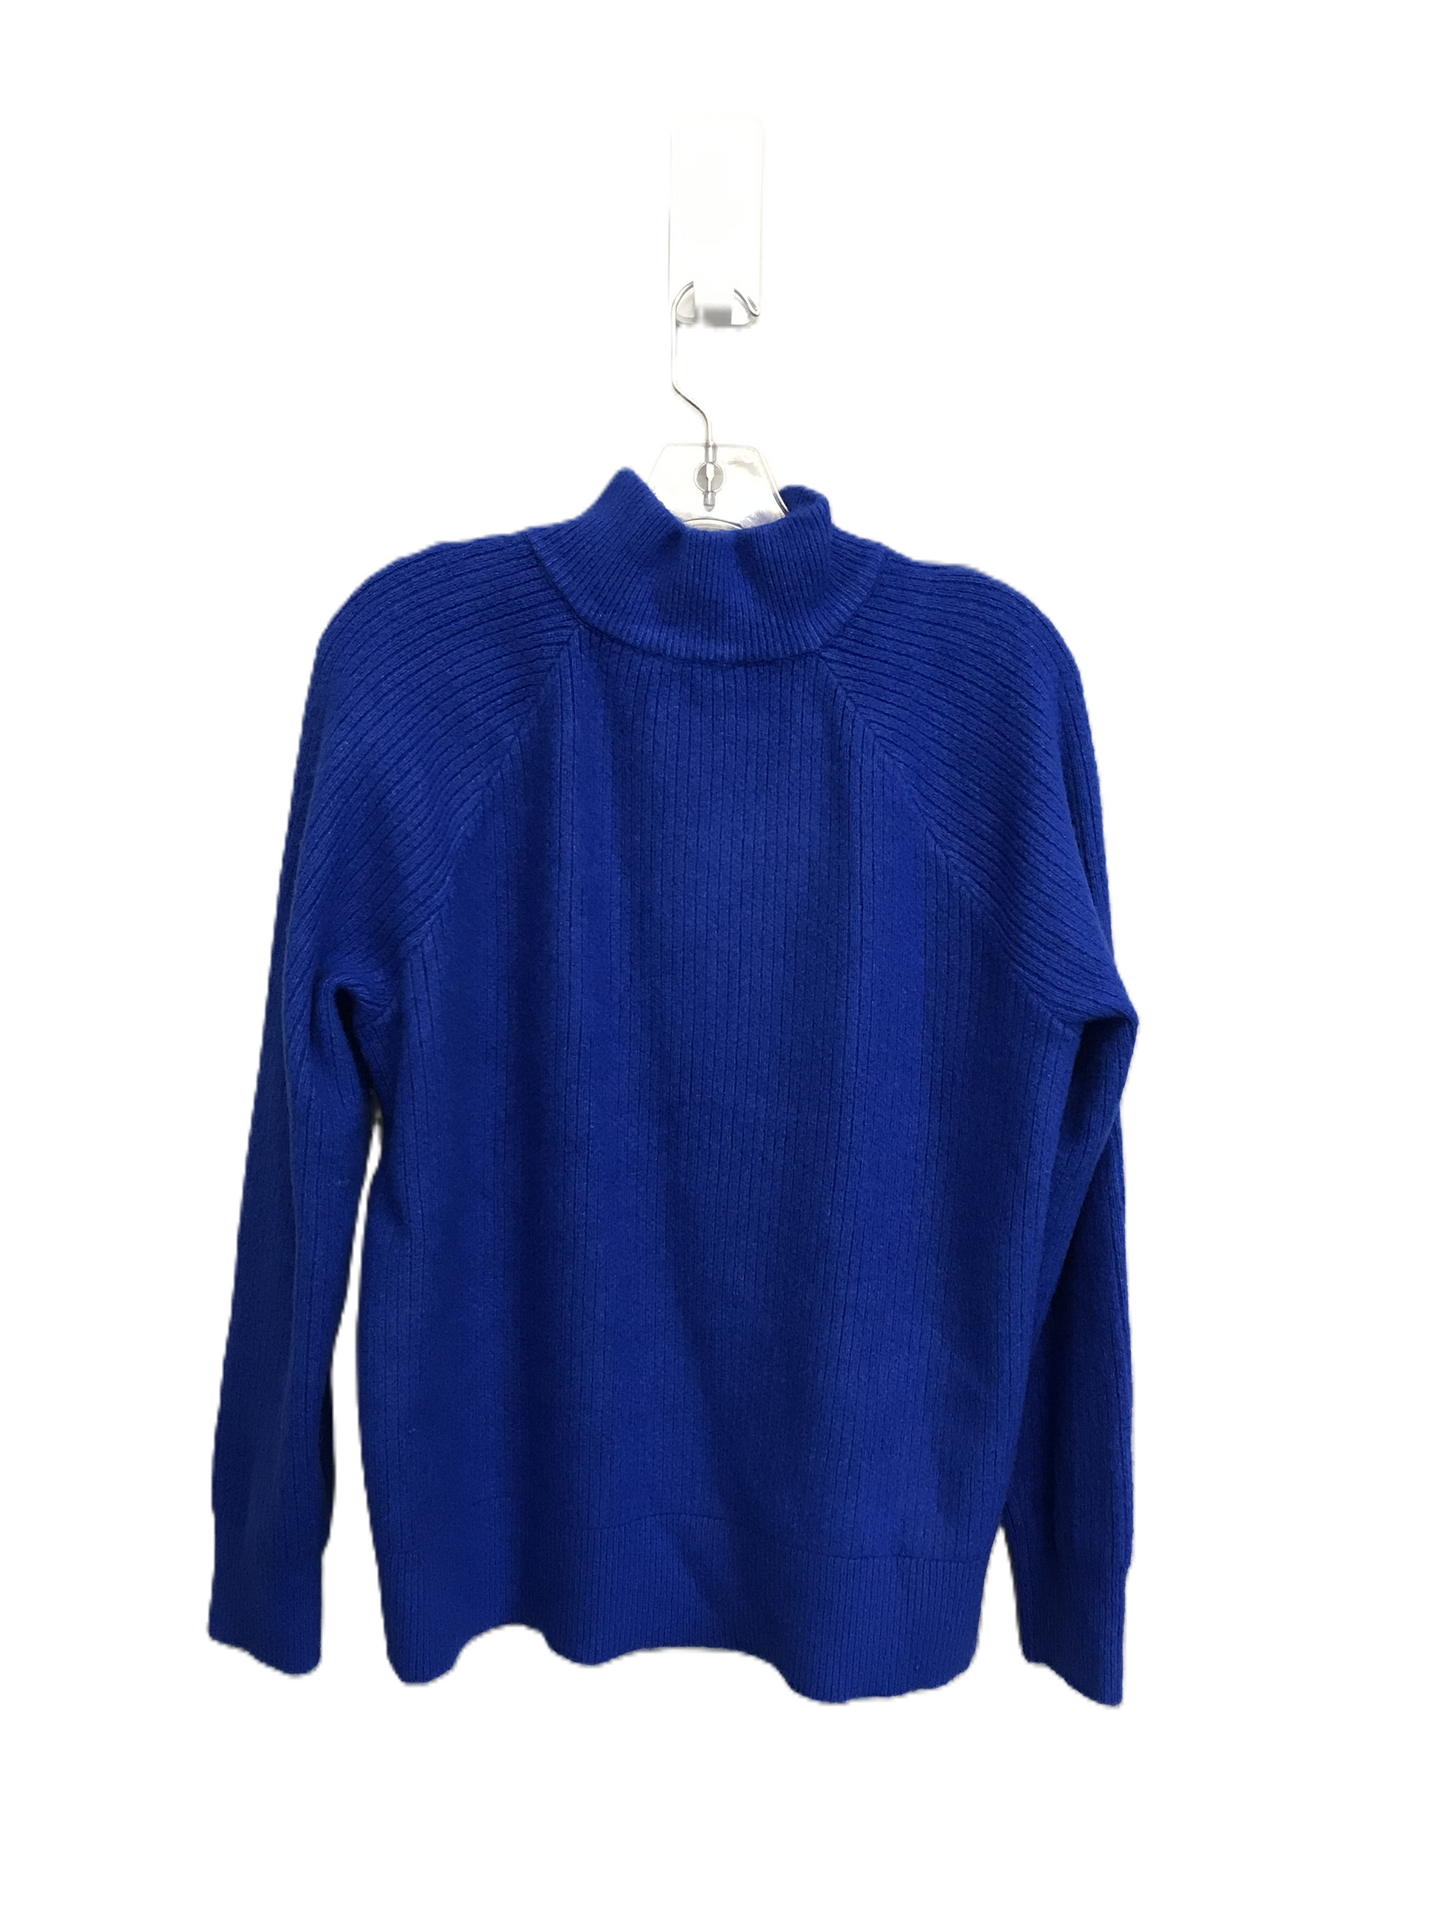 Blue Sweater By Lou And Grey, Size: M